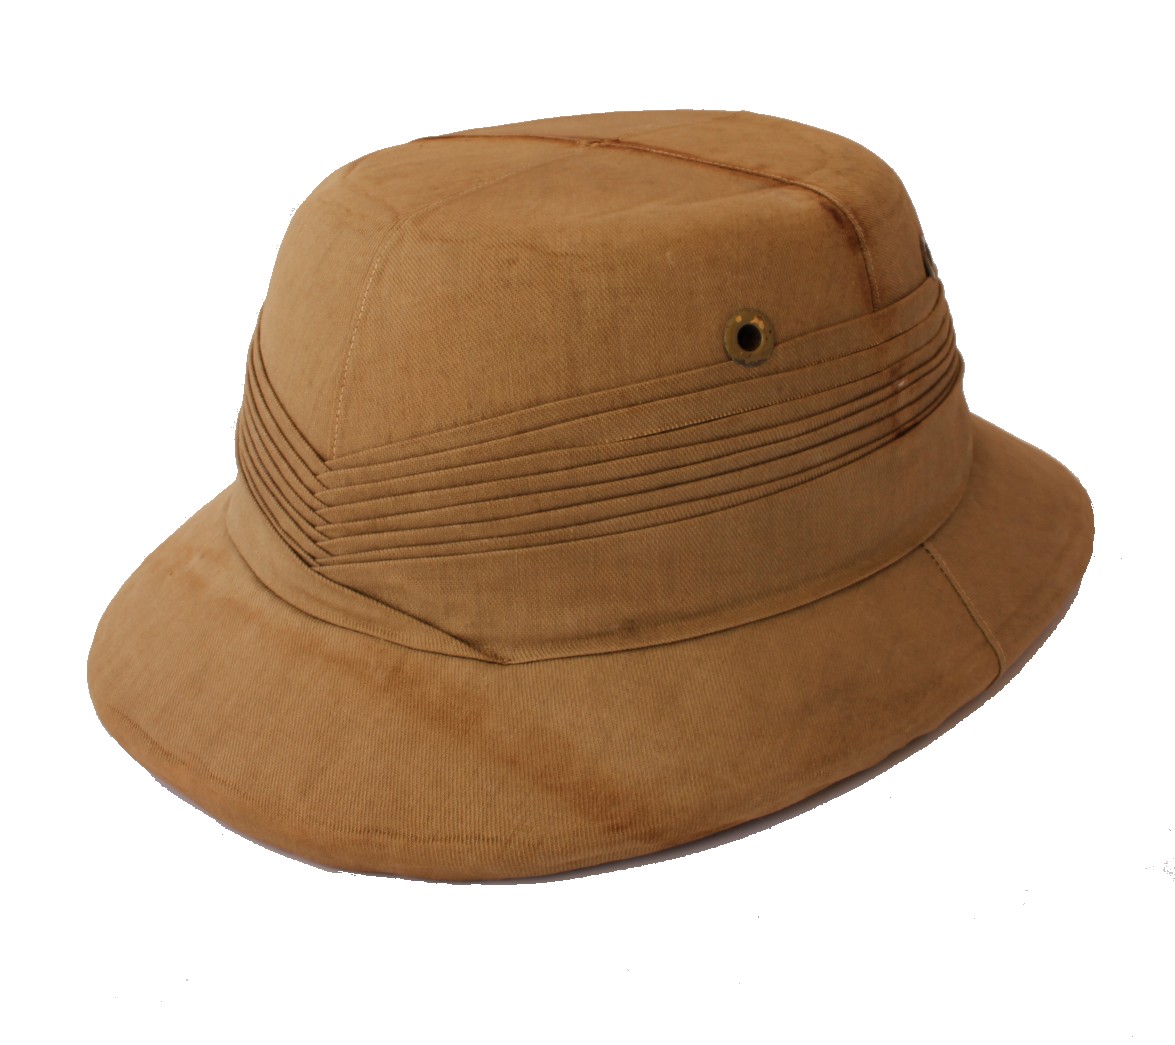 Khaki Polo Pith Helmet. Made in India. Military Hat. Size 7 c1940.